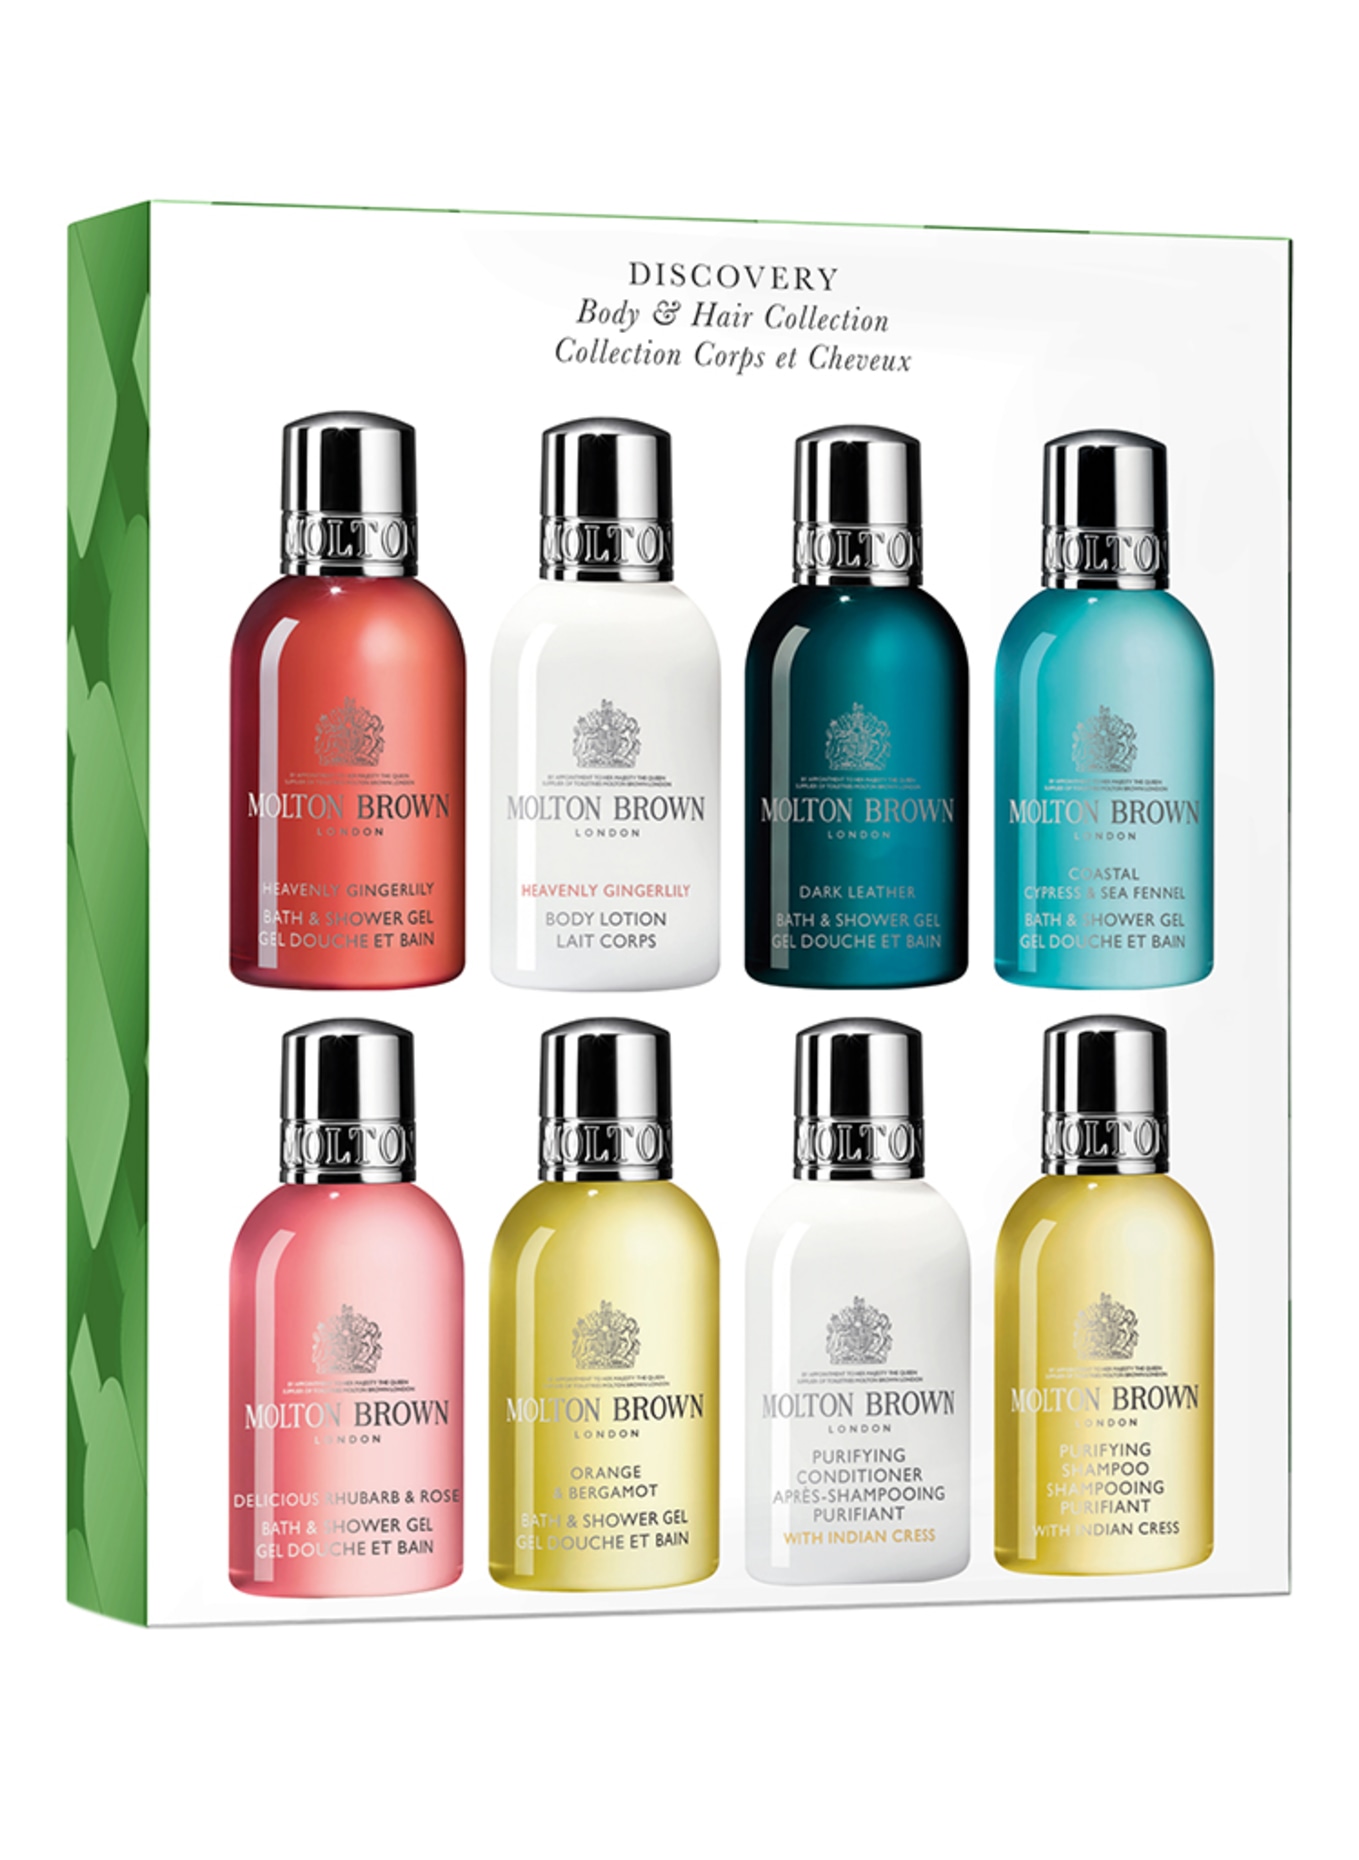 MOLTON BROWN DISCOVERY BODY & HAIR COLLECTION (Obrázek 1)